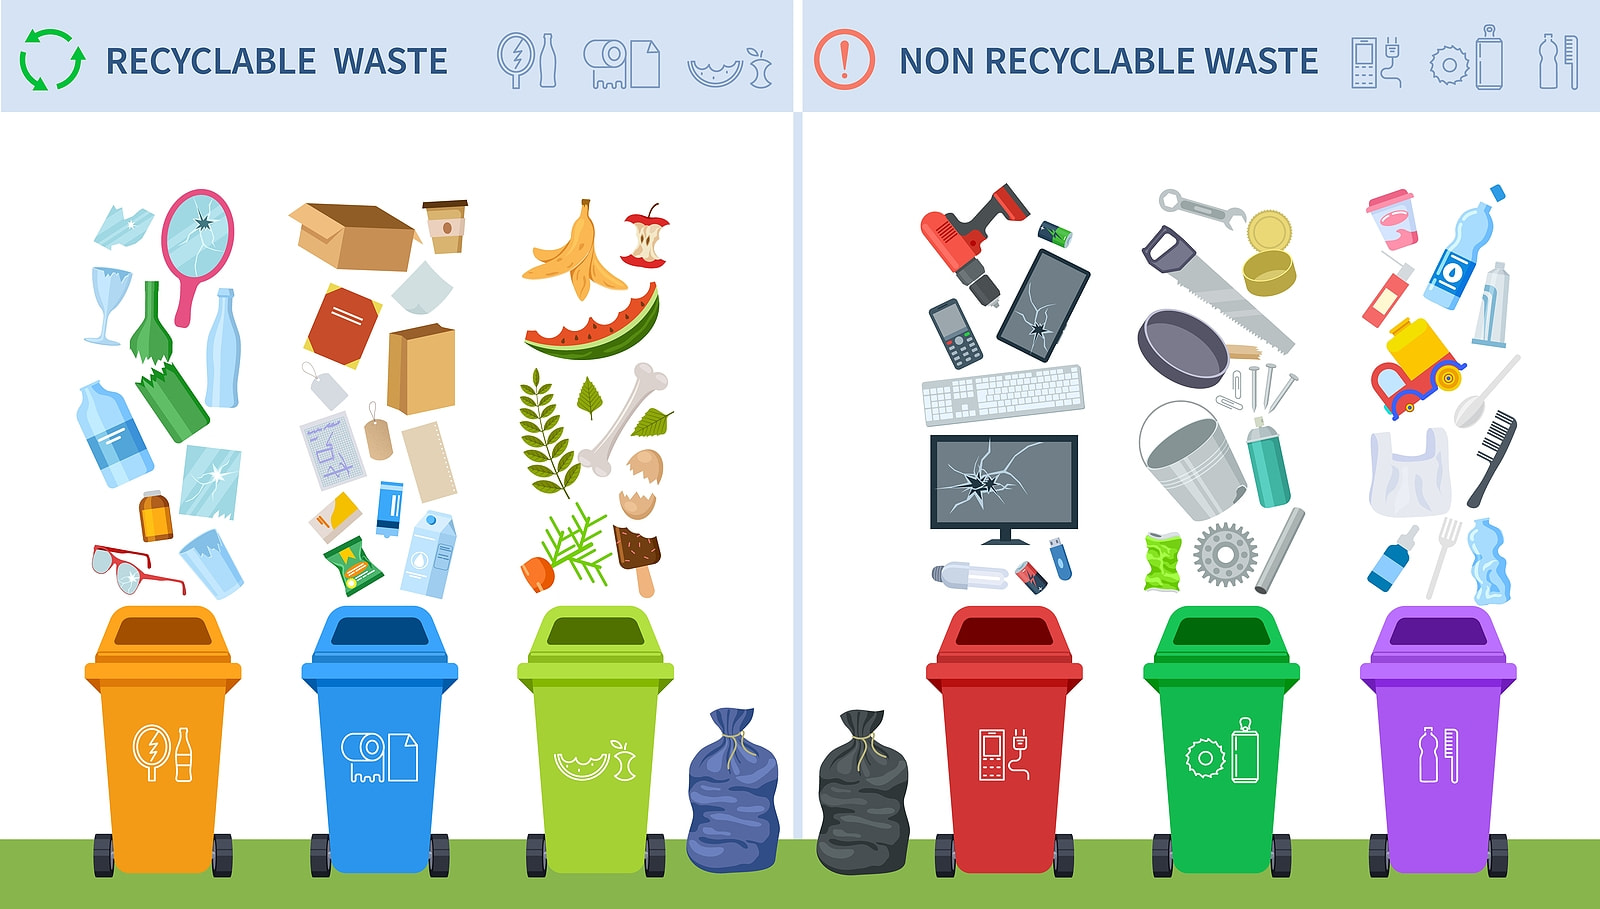 recycling tips - what can be recycled?